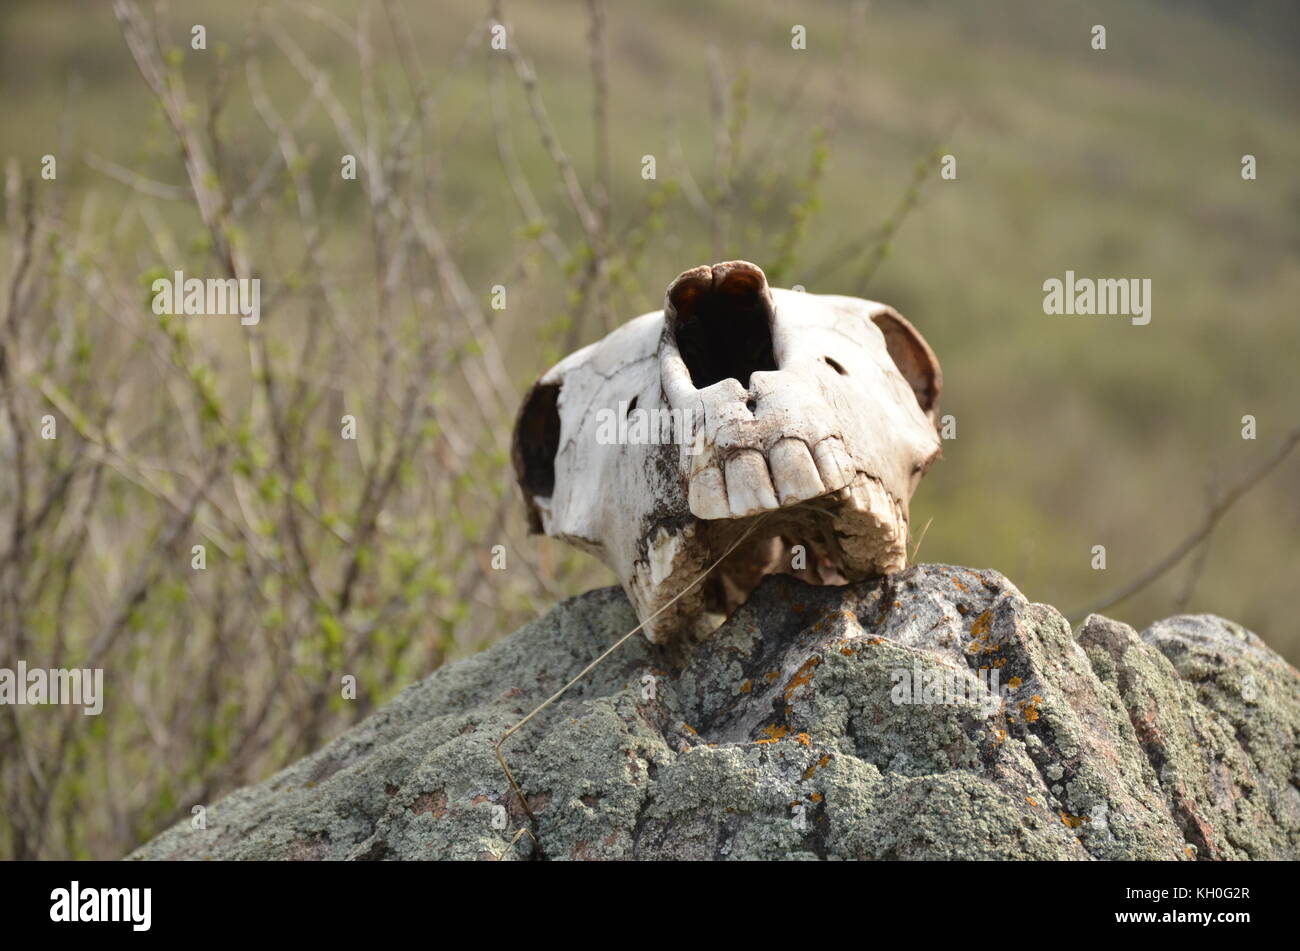 Horse skull on rock in nature in Kyrgyzstan, Asia. Stock Photo